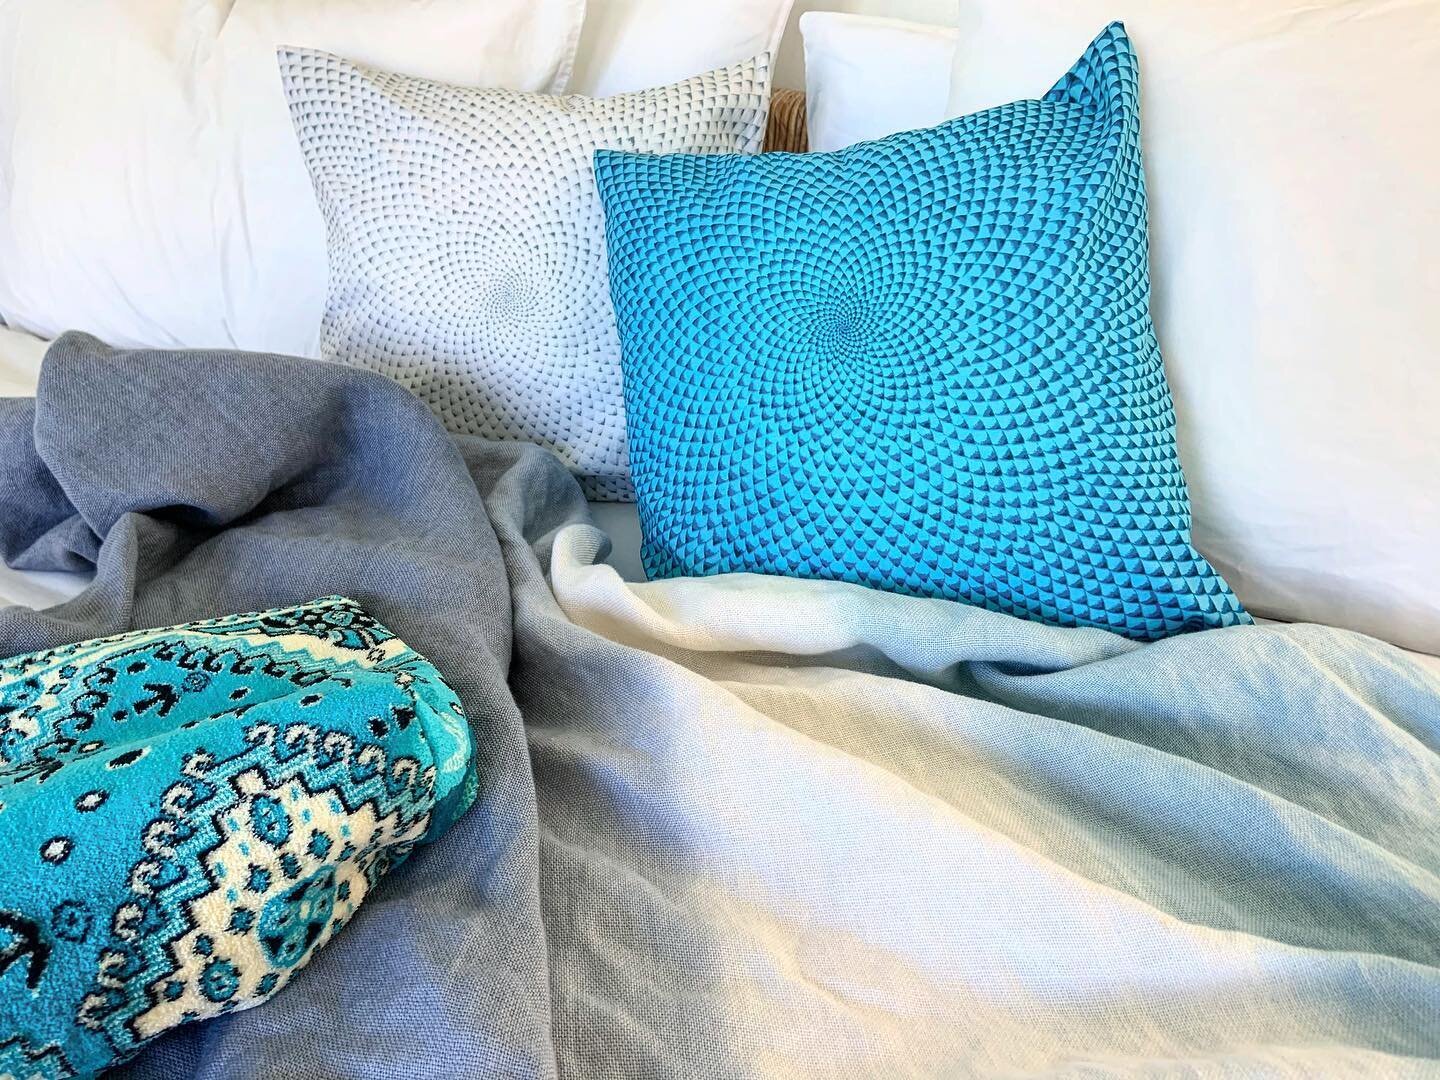 Multi colored throw pillows designed by @alexandergorlizki. Digitally printed and made in India on 100% cotton percale. Gorlizki&rsquo;s design and color pallet bring life to any room.

These 16 x 16 inch pillows are available now in six colors on, W